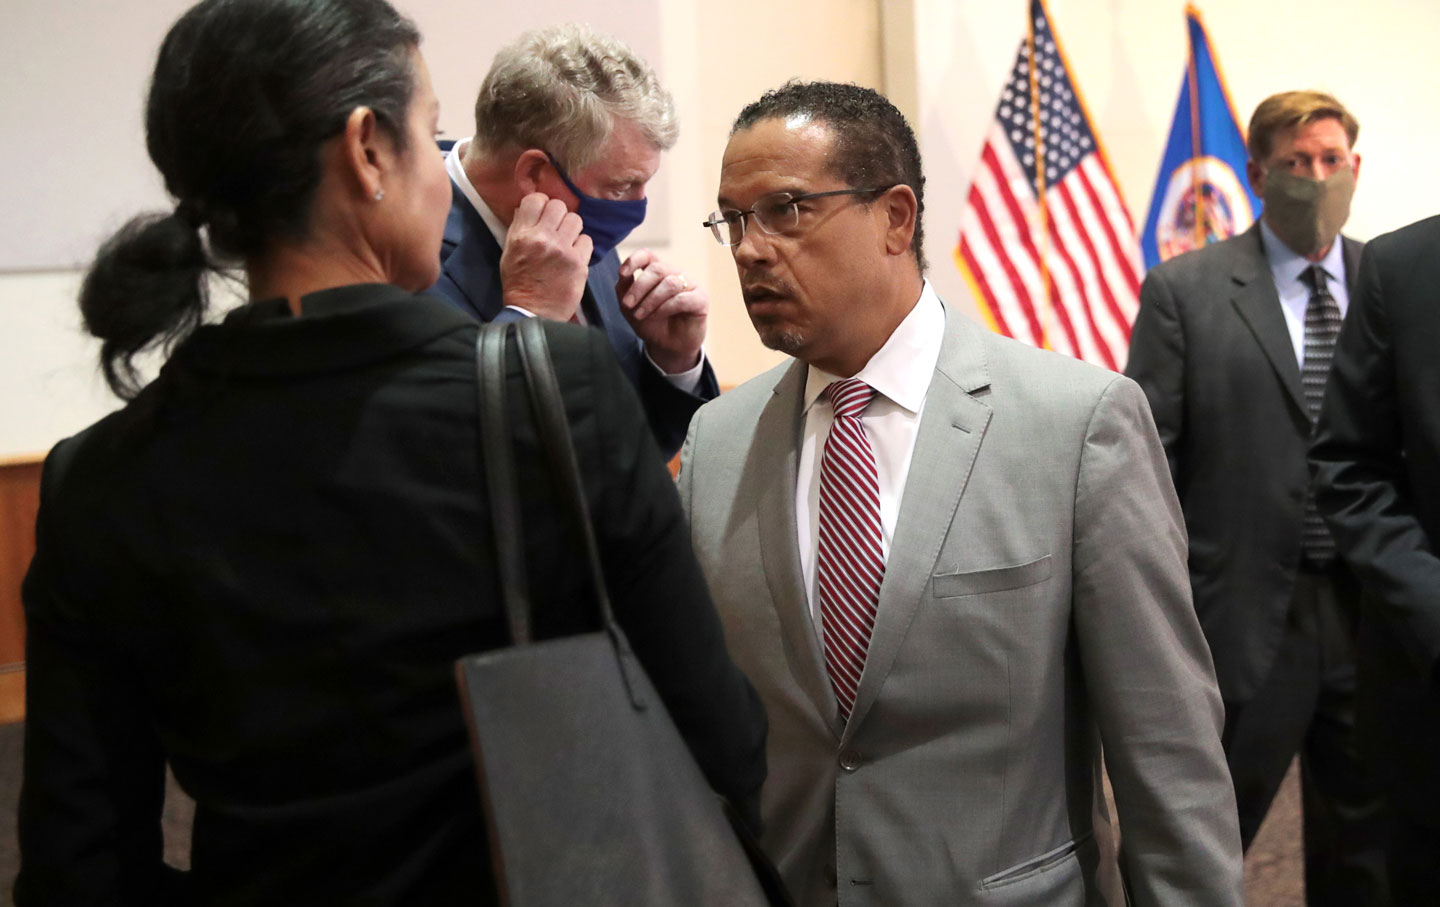 Keith Ellison: On the Other Side of Criminal Justice Reform and Transformation Is a Safer Society